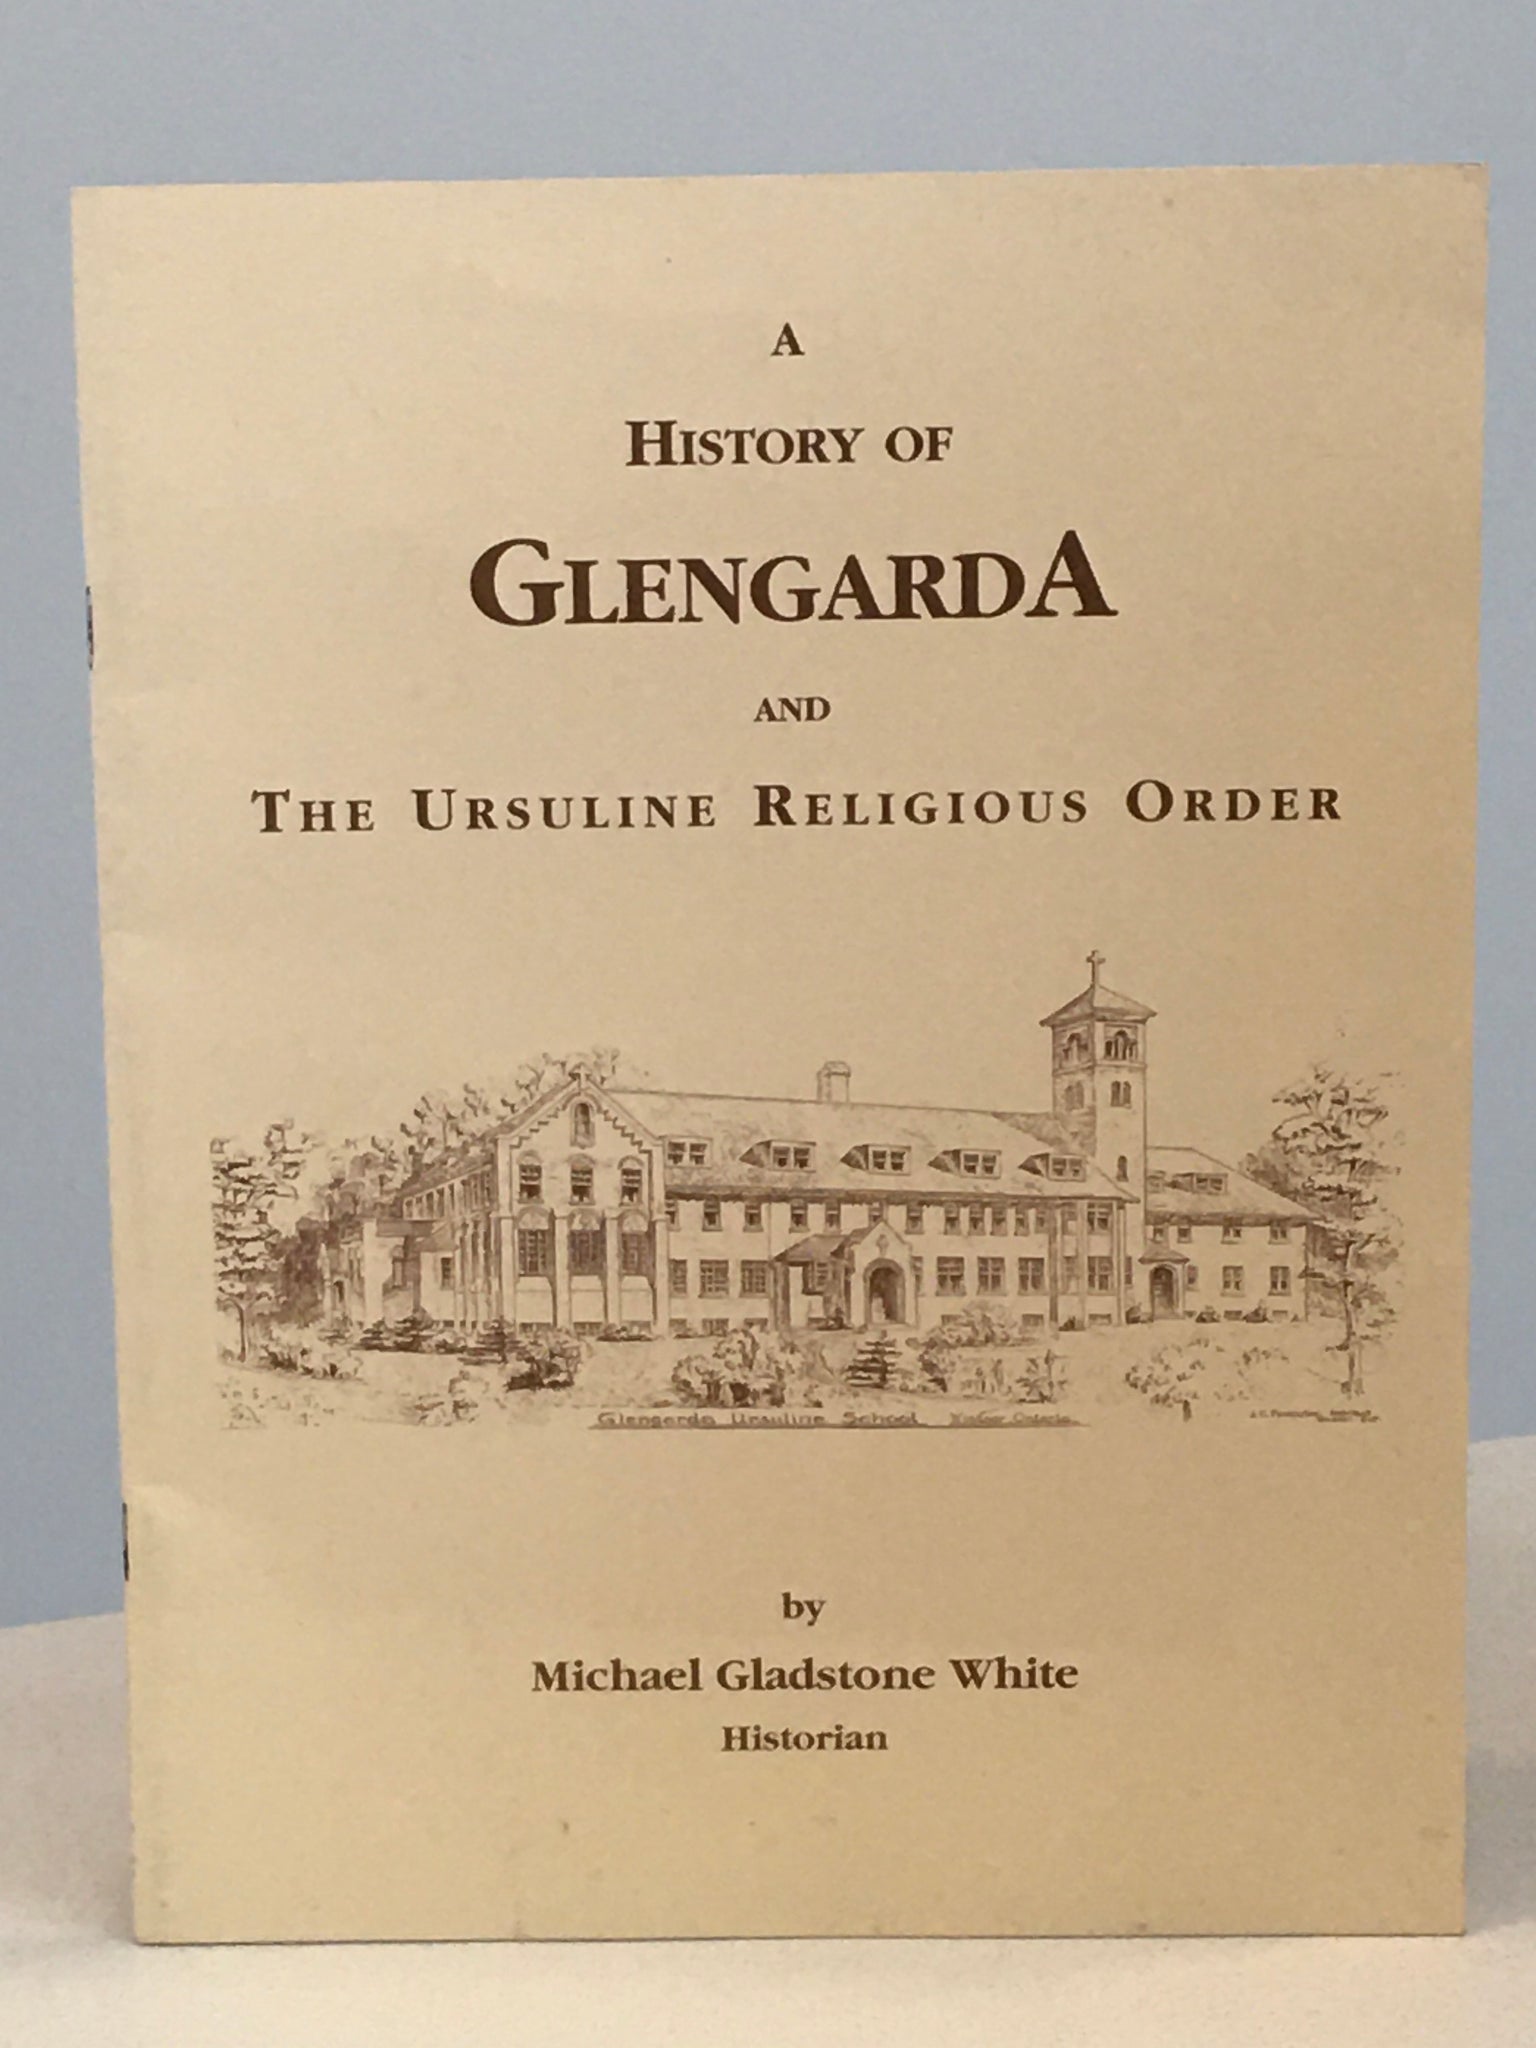 A History of Glengarda and The Ursuline Religious Order